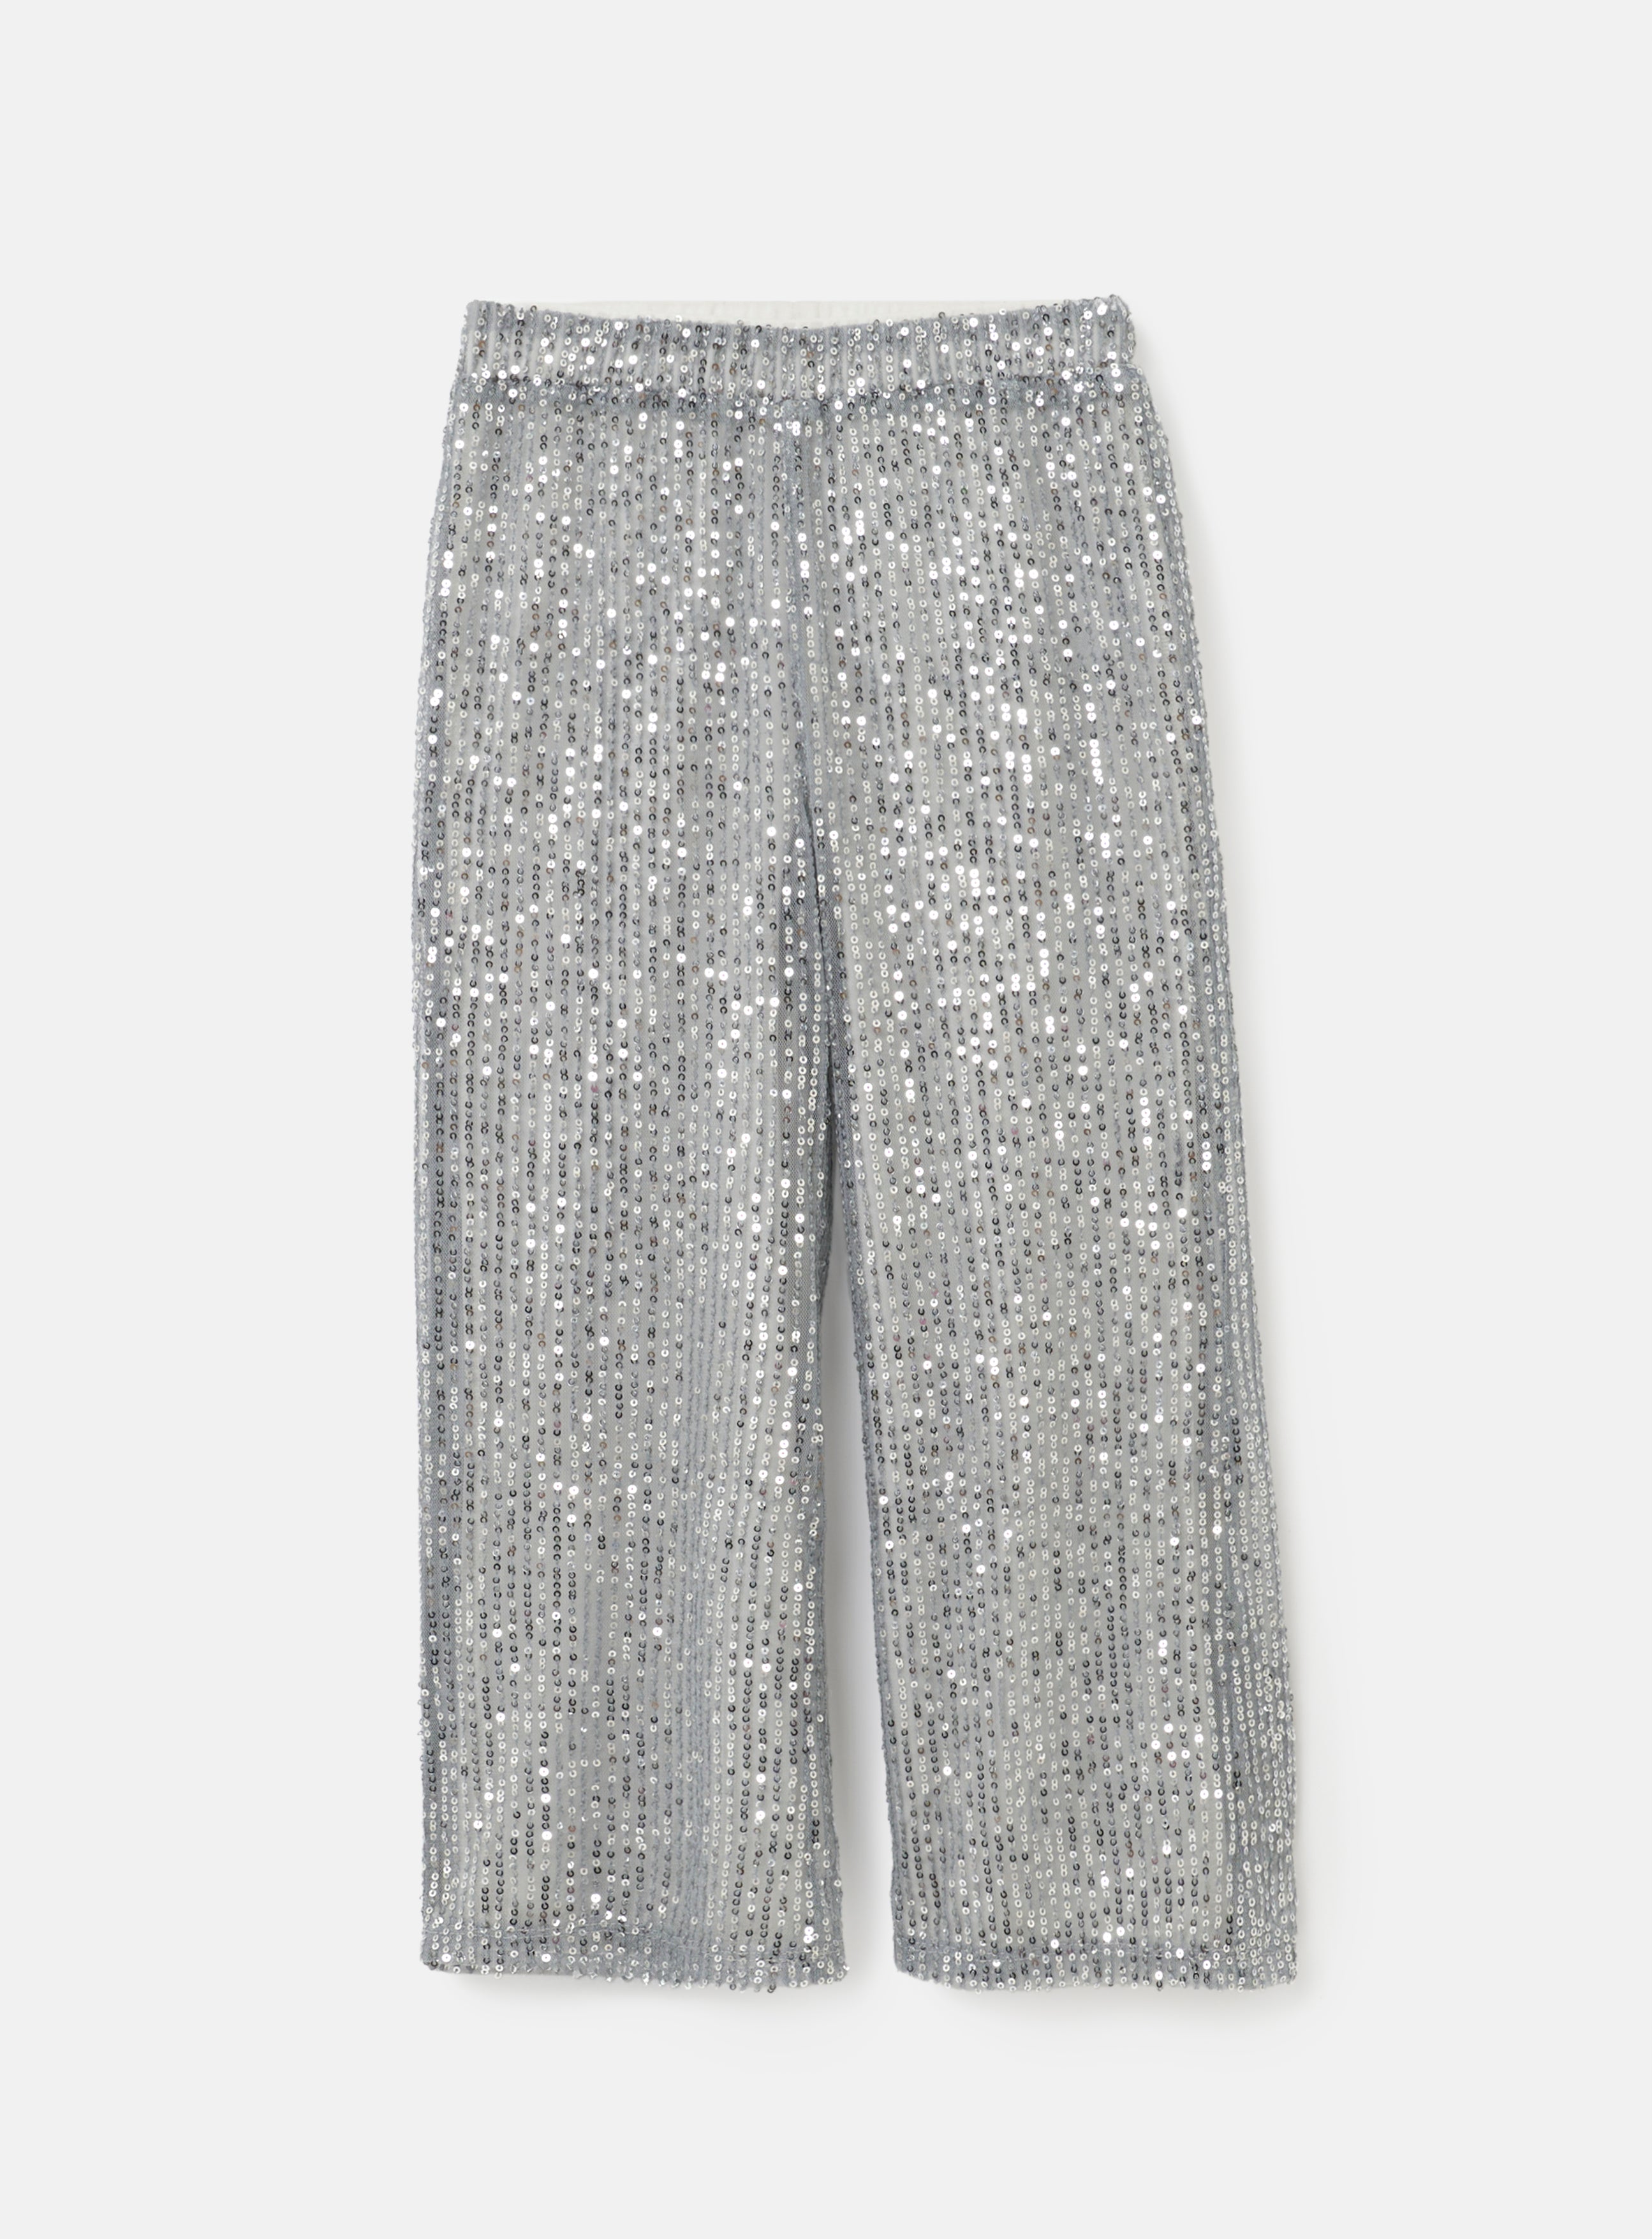 Girls Sequin Embellished Wide Leg Grey Trousers